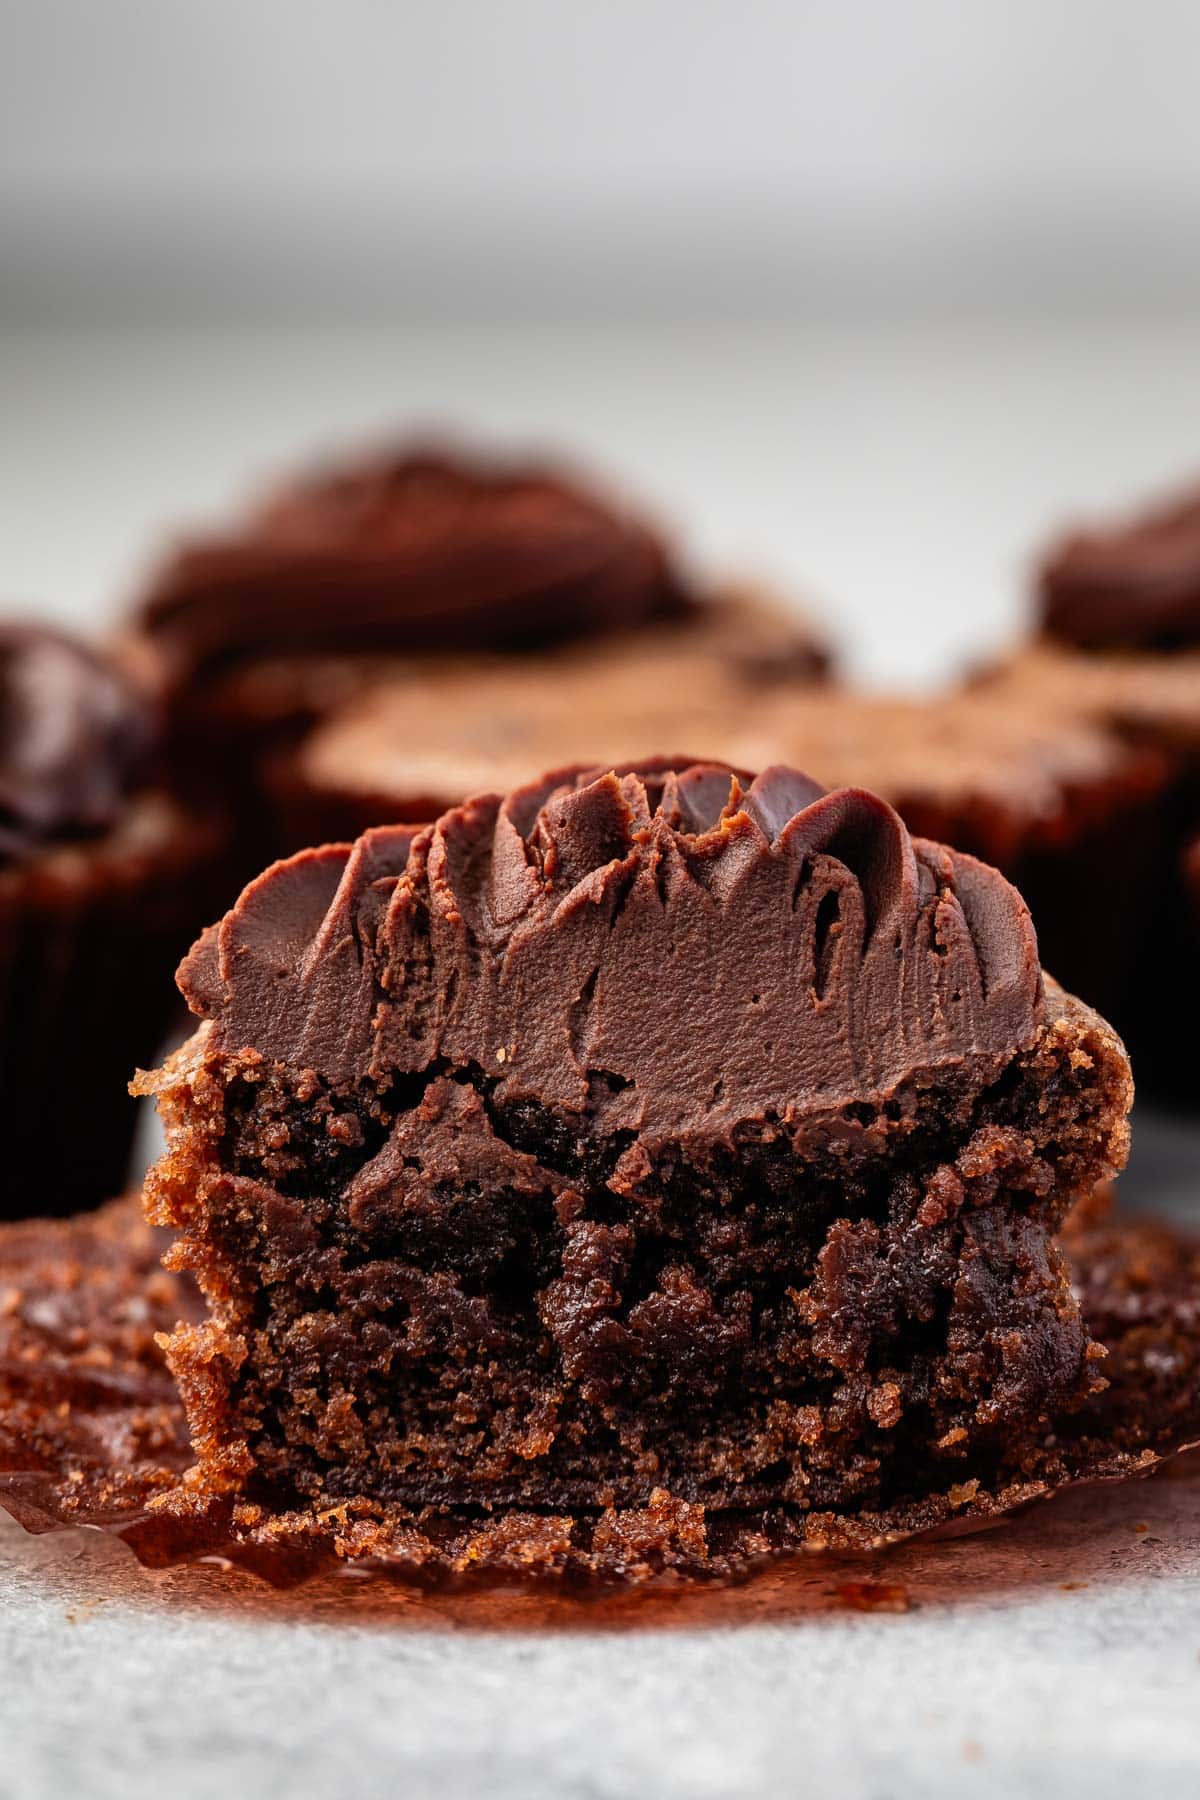 cupcake made of brownies with chocolate frosting on top.